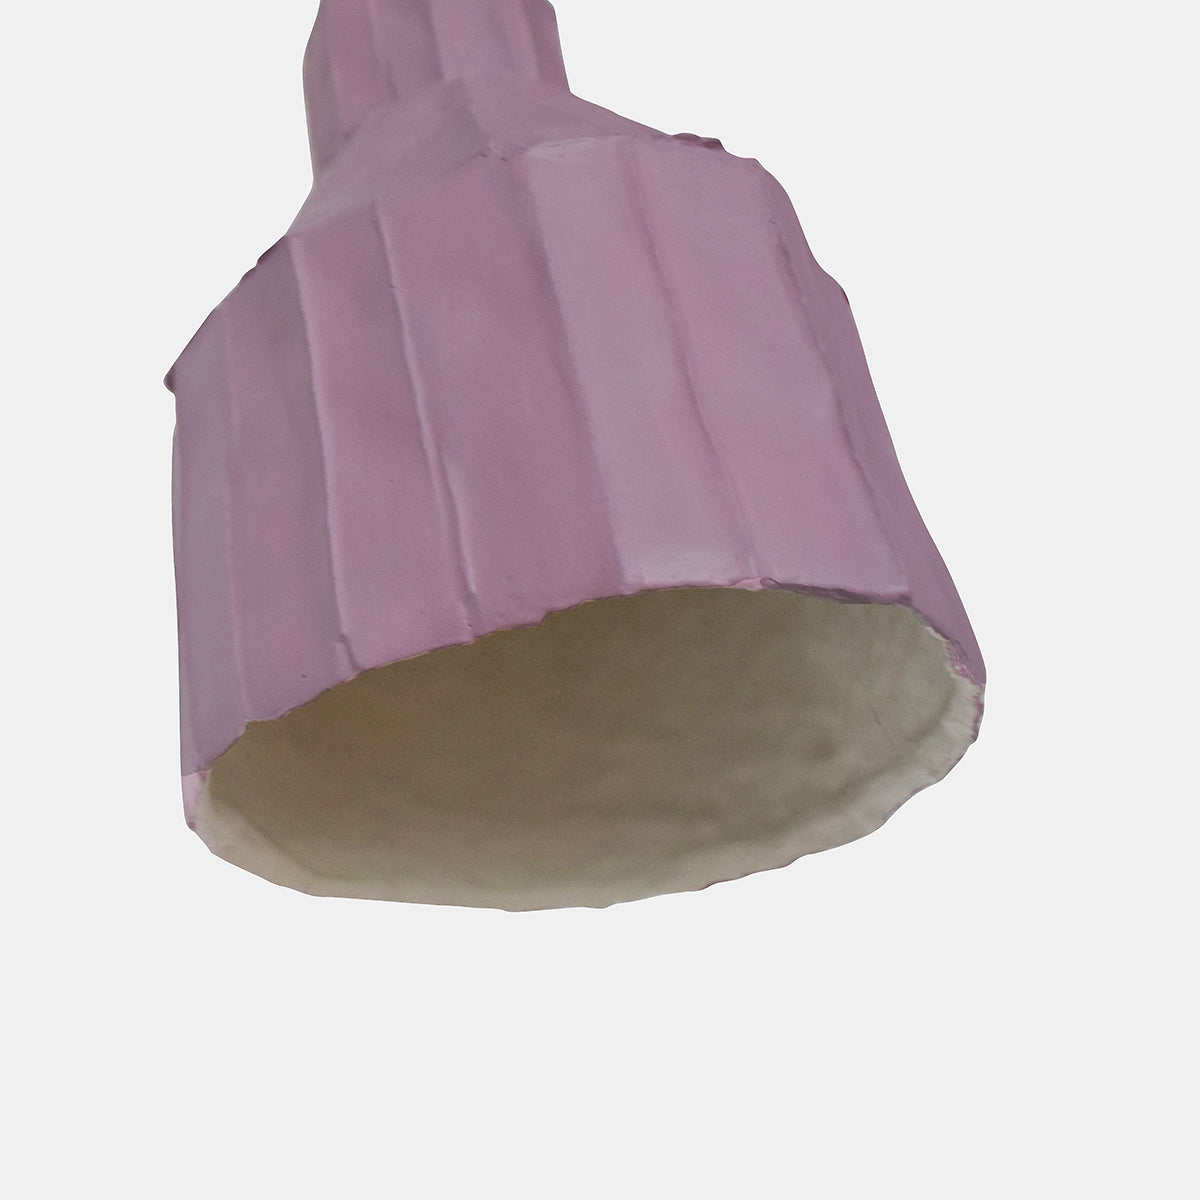 Petal Pink Cylinder Paper Clay Pendant